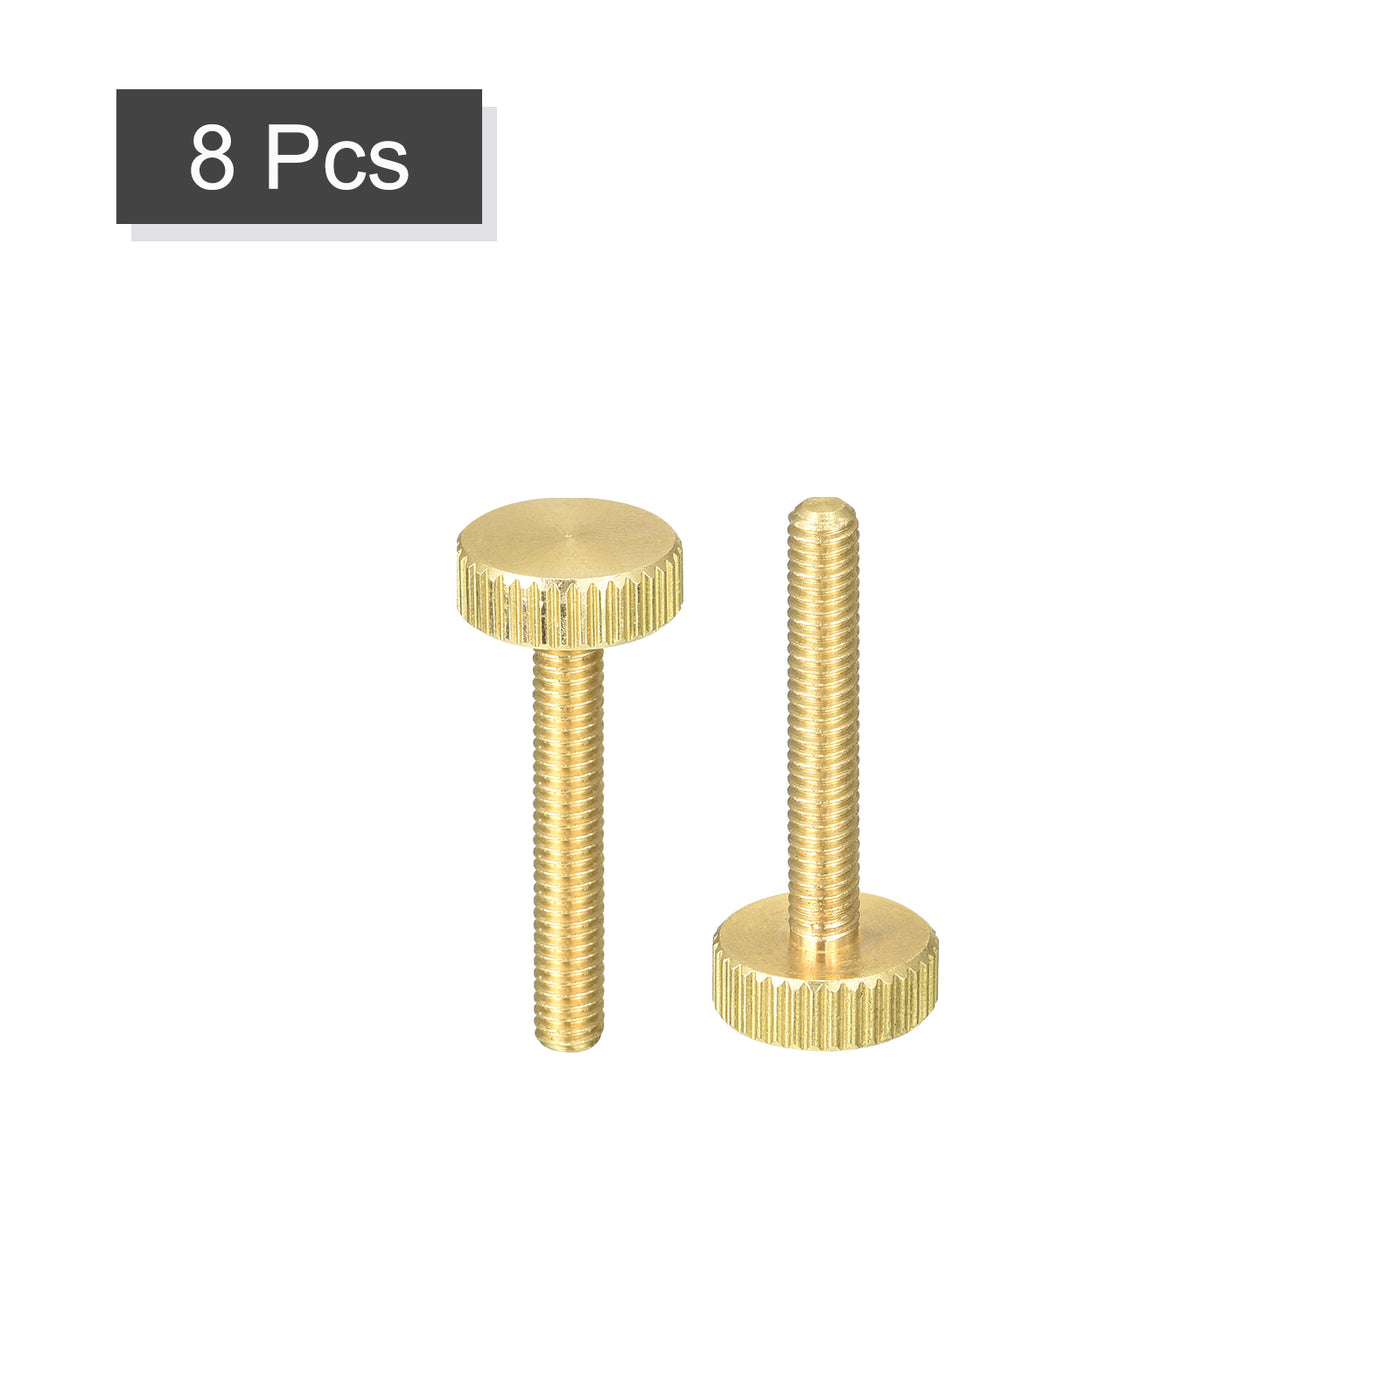 uxcell Uxcell Knurled Thumb Screws, M4x25mm Flat Brass Bolts 12mm Dia.Grip Knobs Fasteners for PC, Electronic, Mechanical 8Pcs